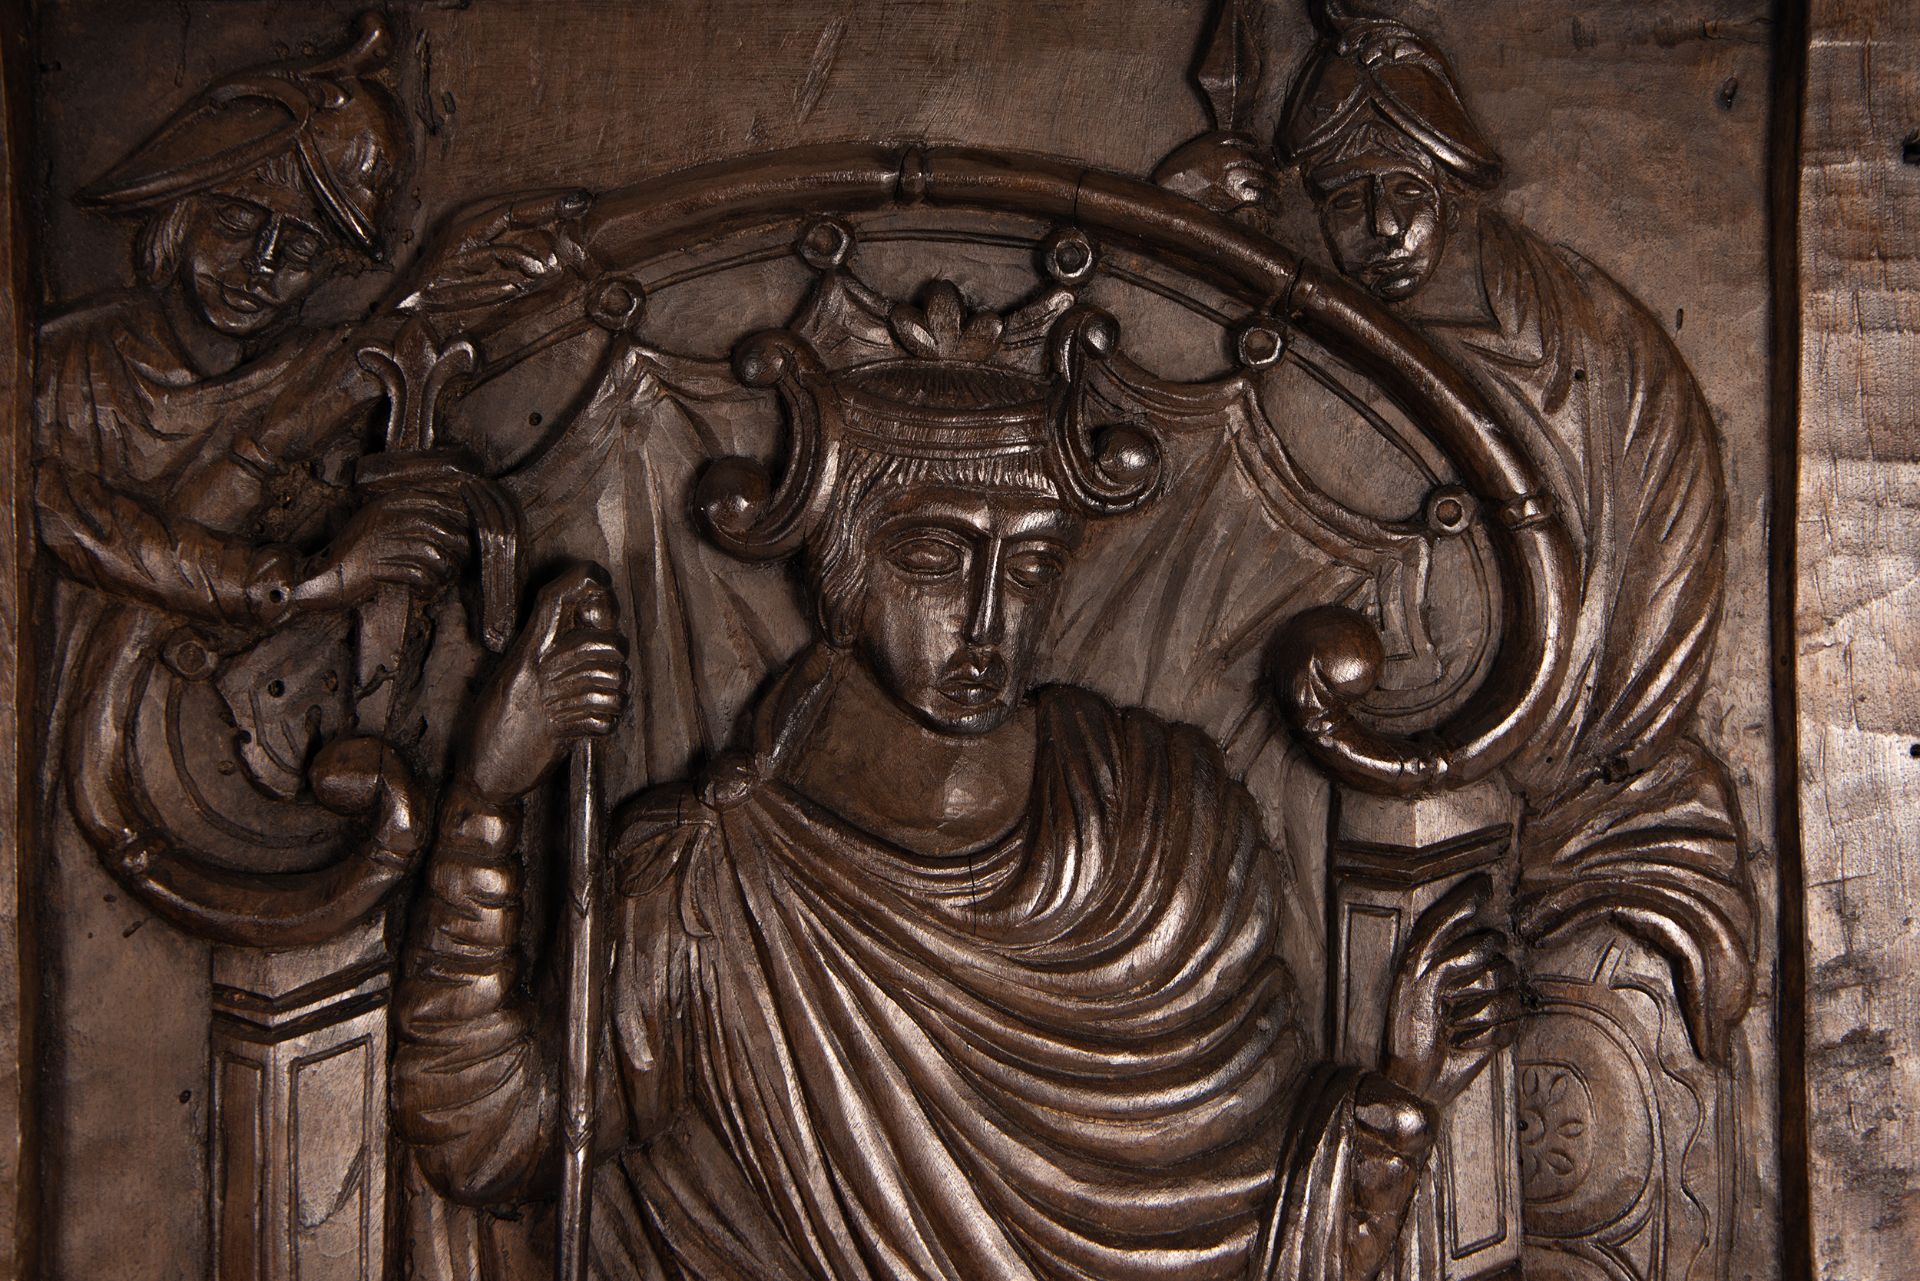 Large relief of Ferdinand the Catholic, possibly the Navarran School of the 14th - 15th centuries